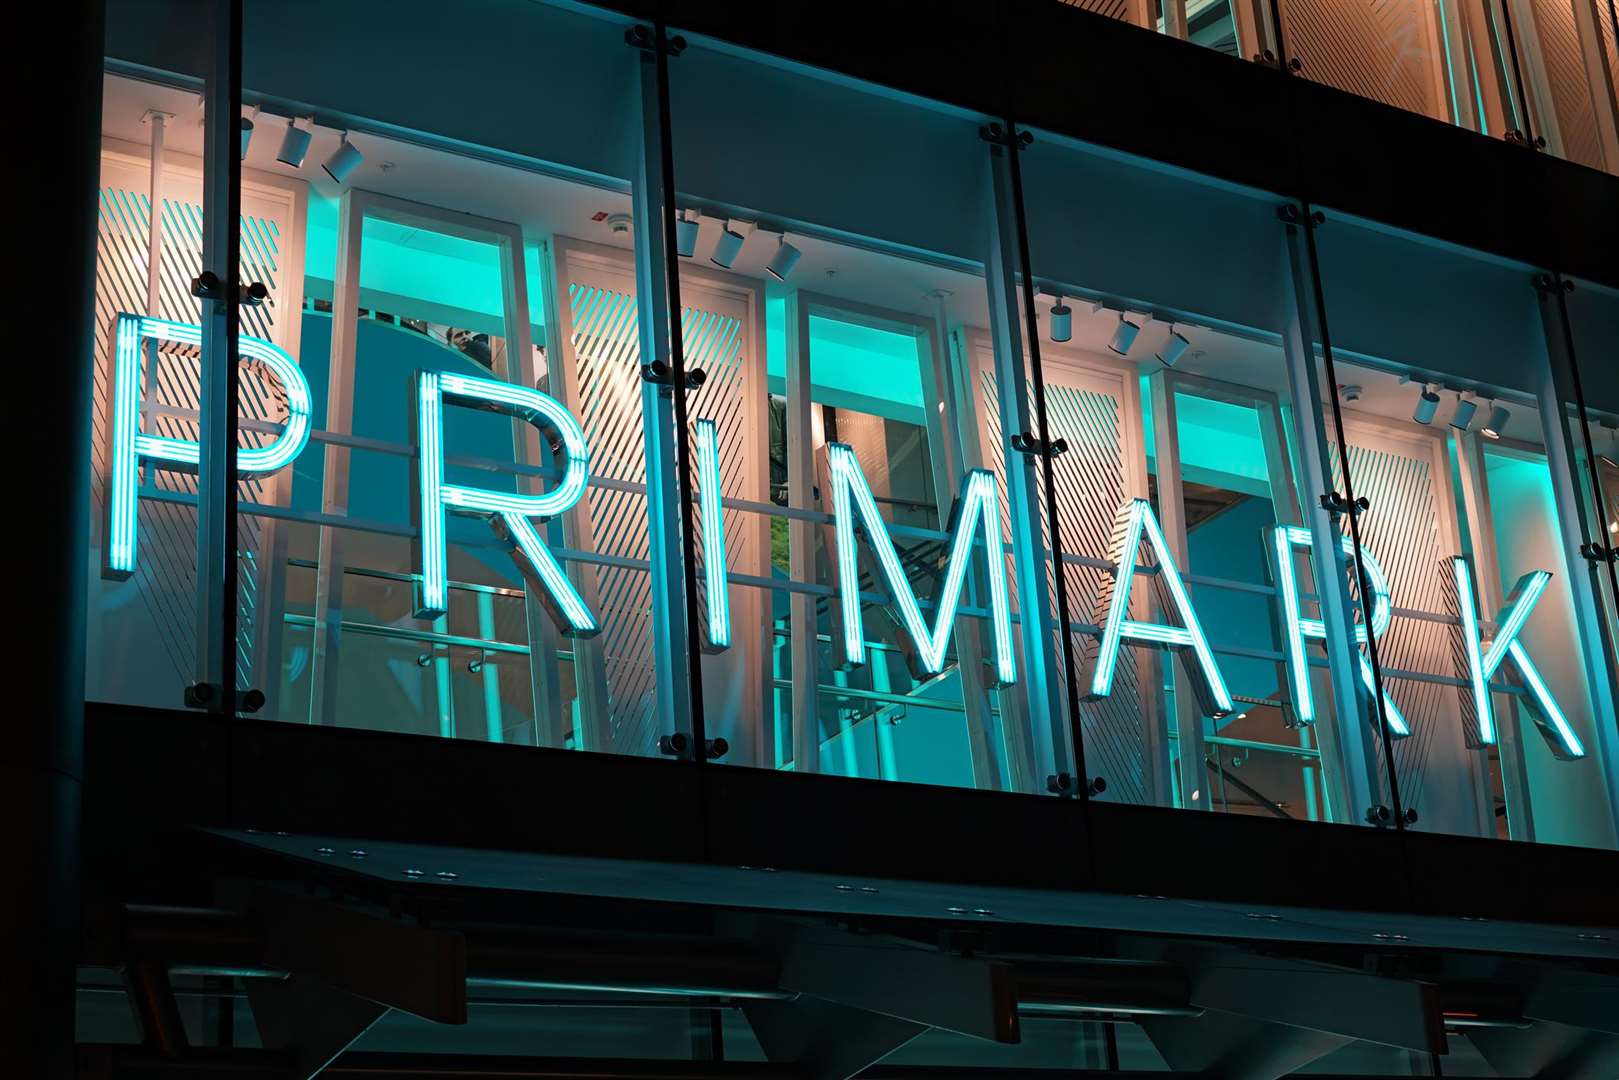 Primark has submitted a planning application for its Bluewater store